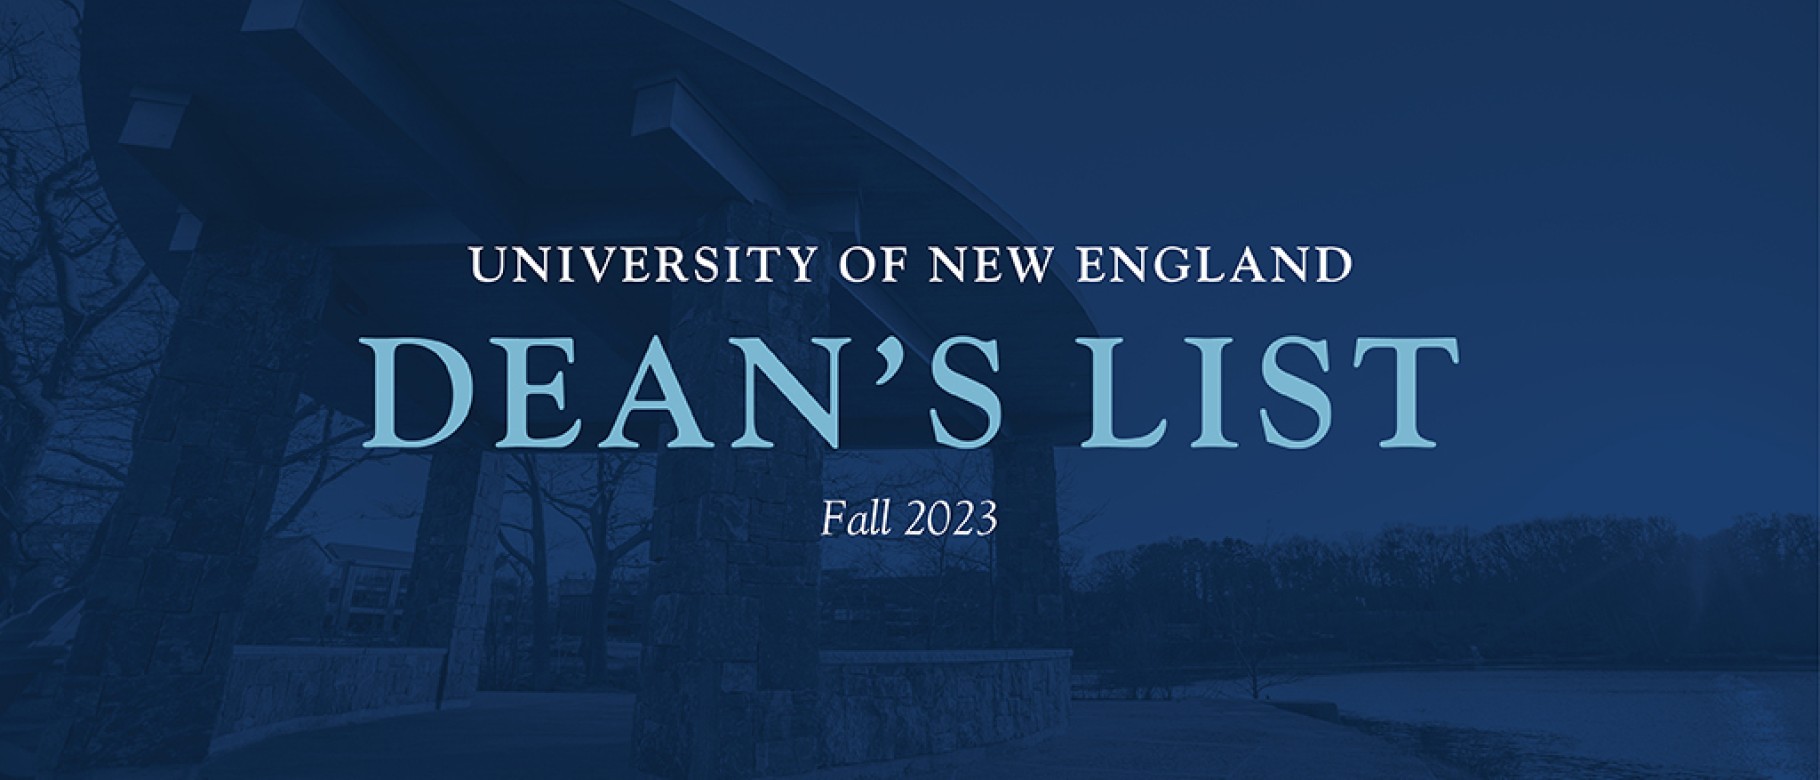 Dean's list graphic for Fall 2023